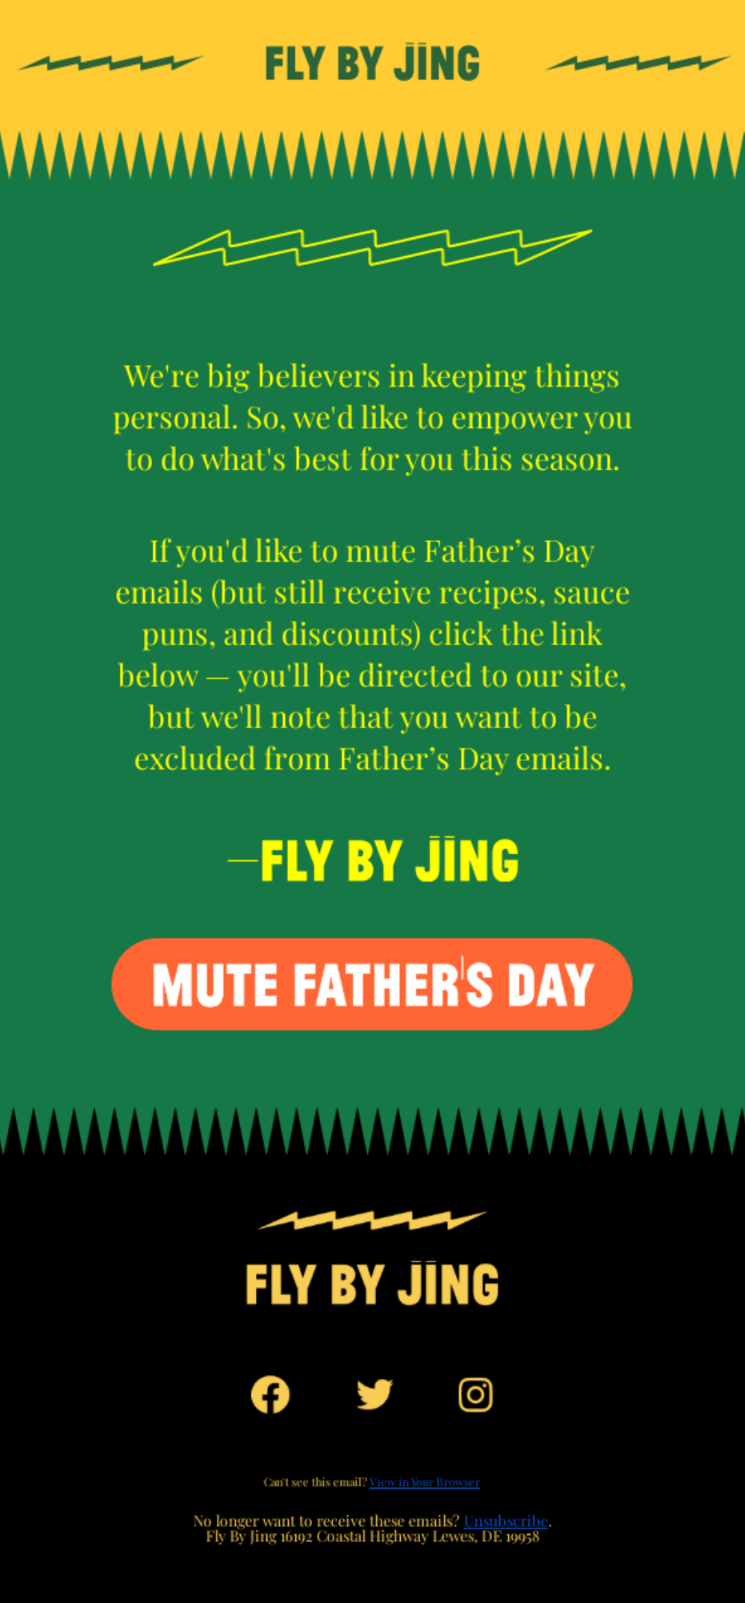 Father's Day opt-out email from Fly by Jing